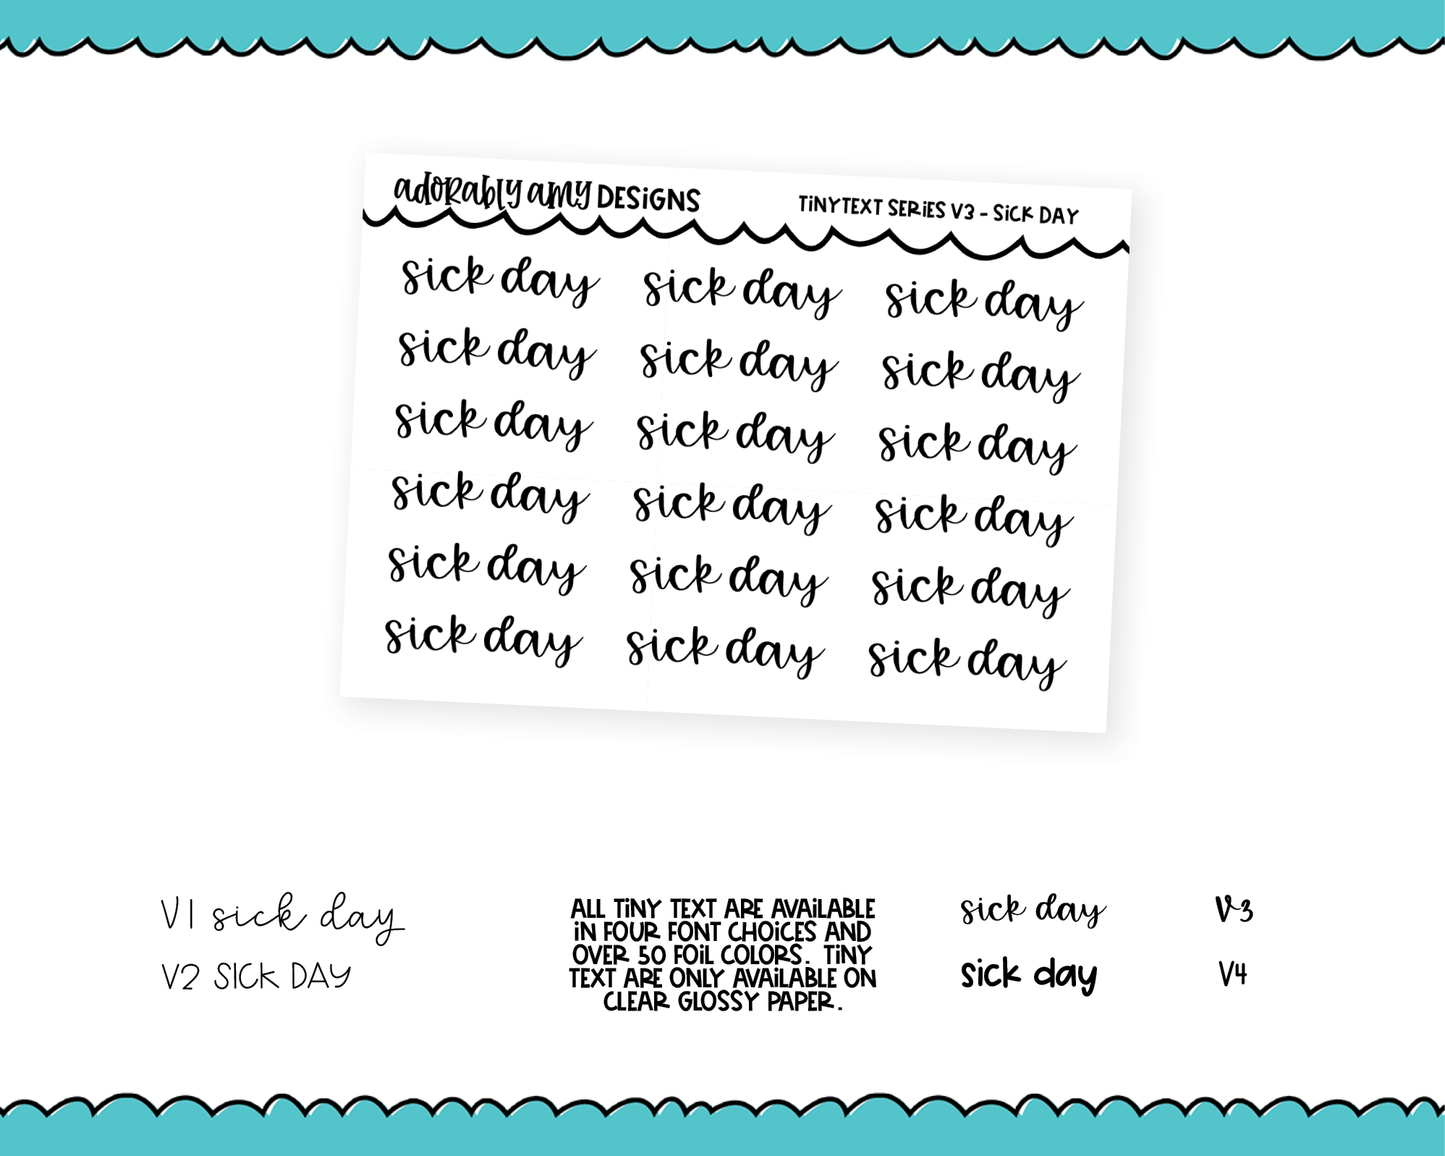 Foiled Tiny Text Series - Sick Day Checklist Size Planner Stickers for any Planner or Insert